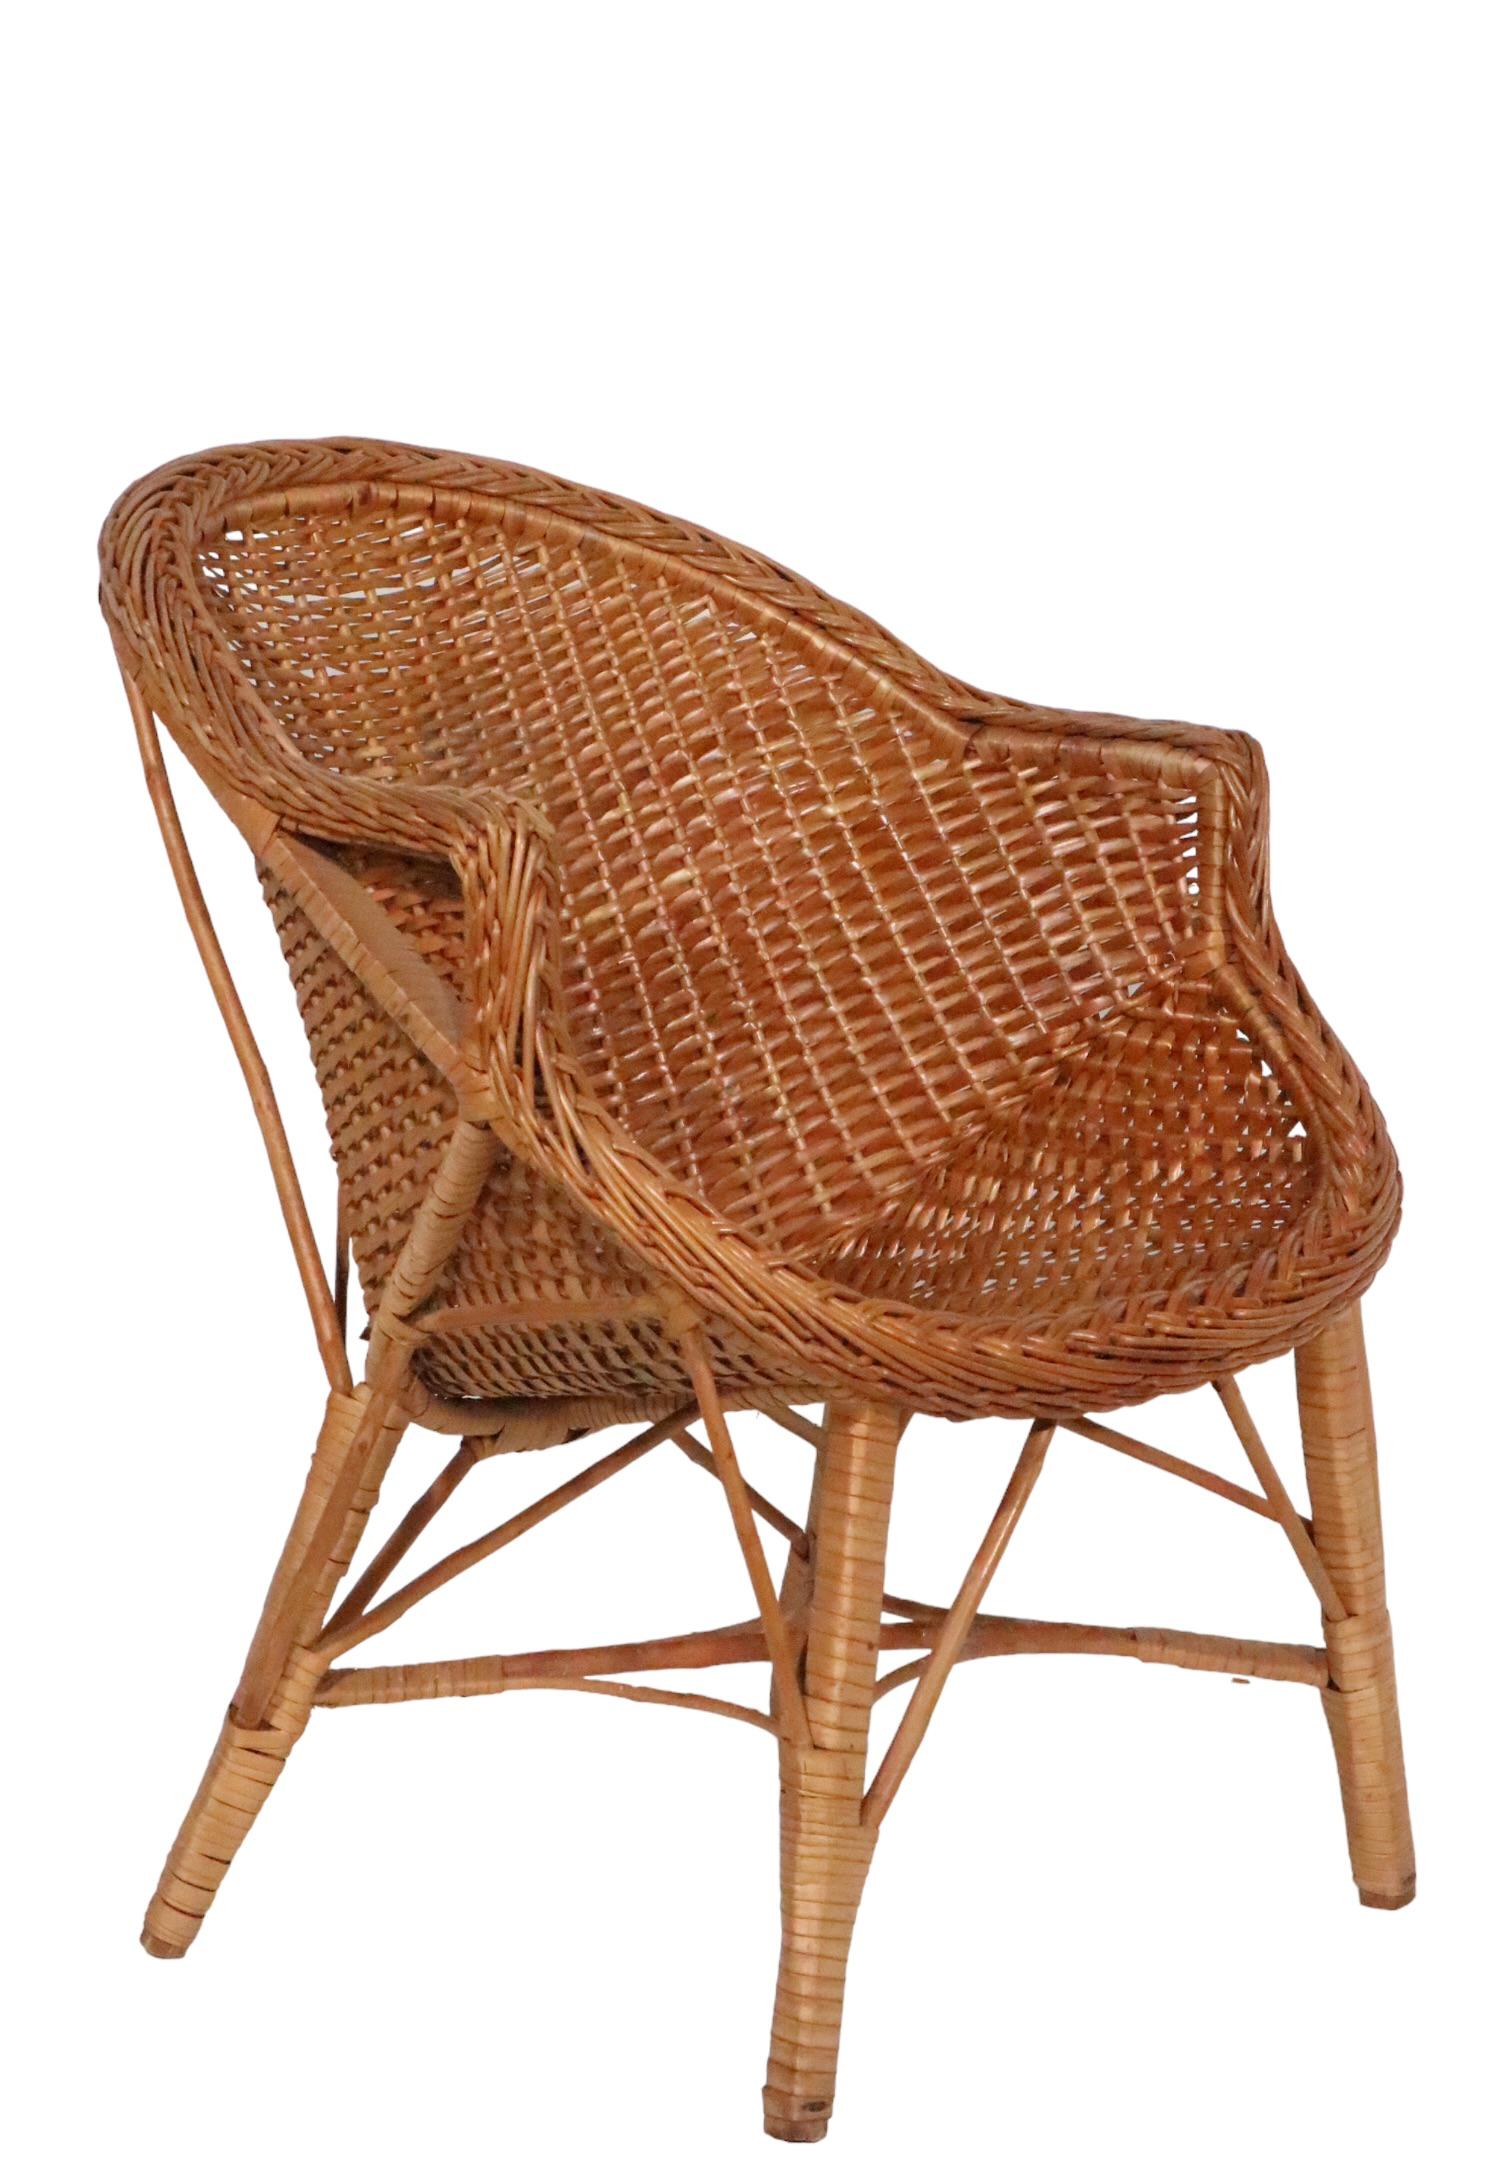 Pr  Mid Century Woven Wicker Arm Chairs  For Sale 6